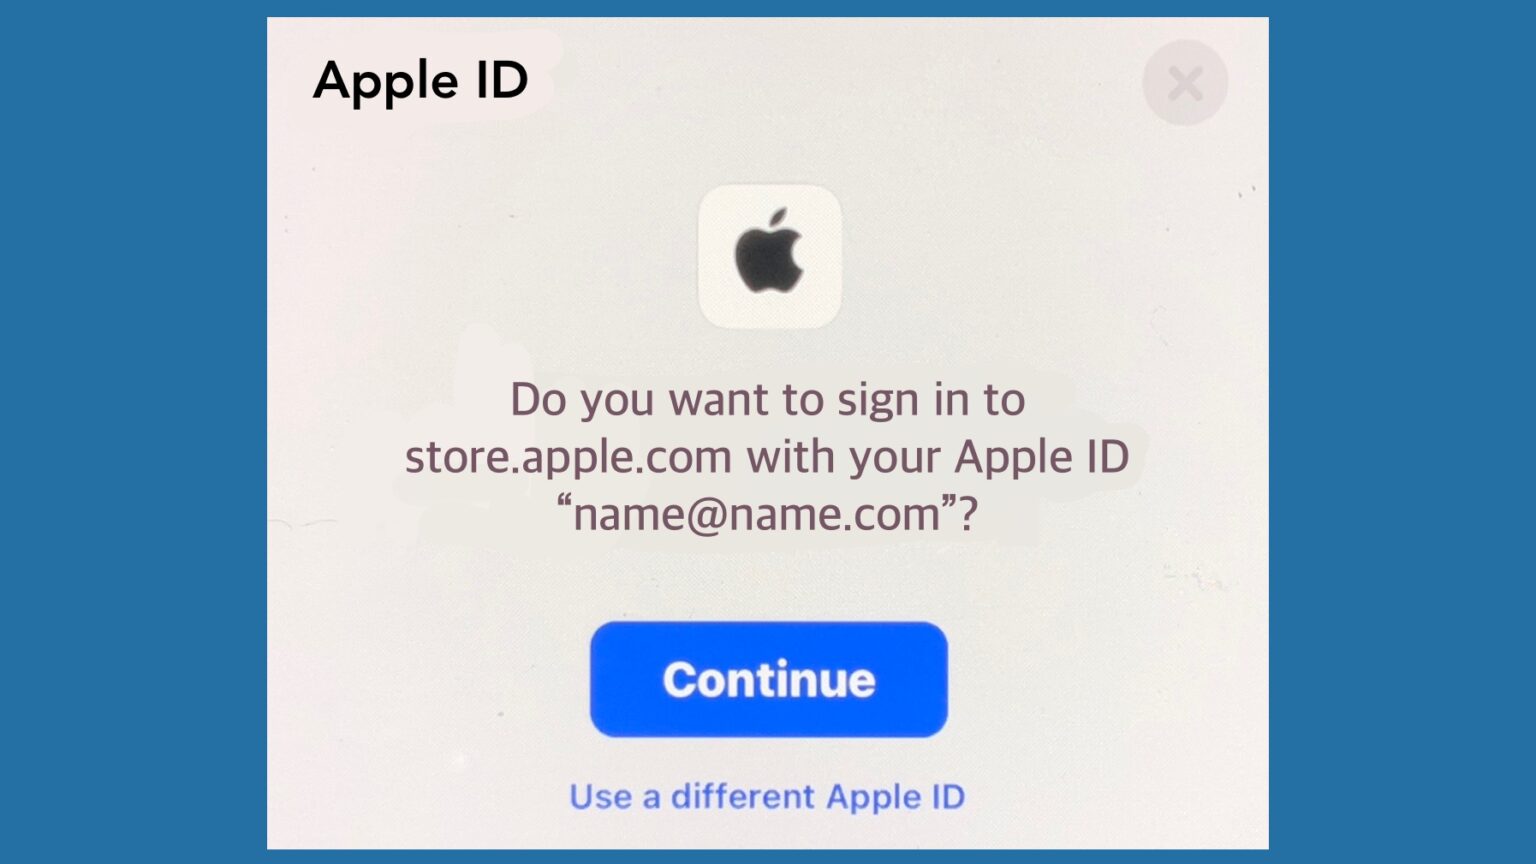 Apple websites use passkeys in place of passwords.